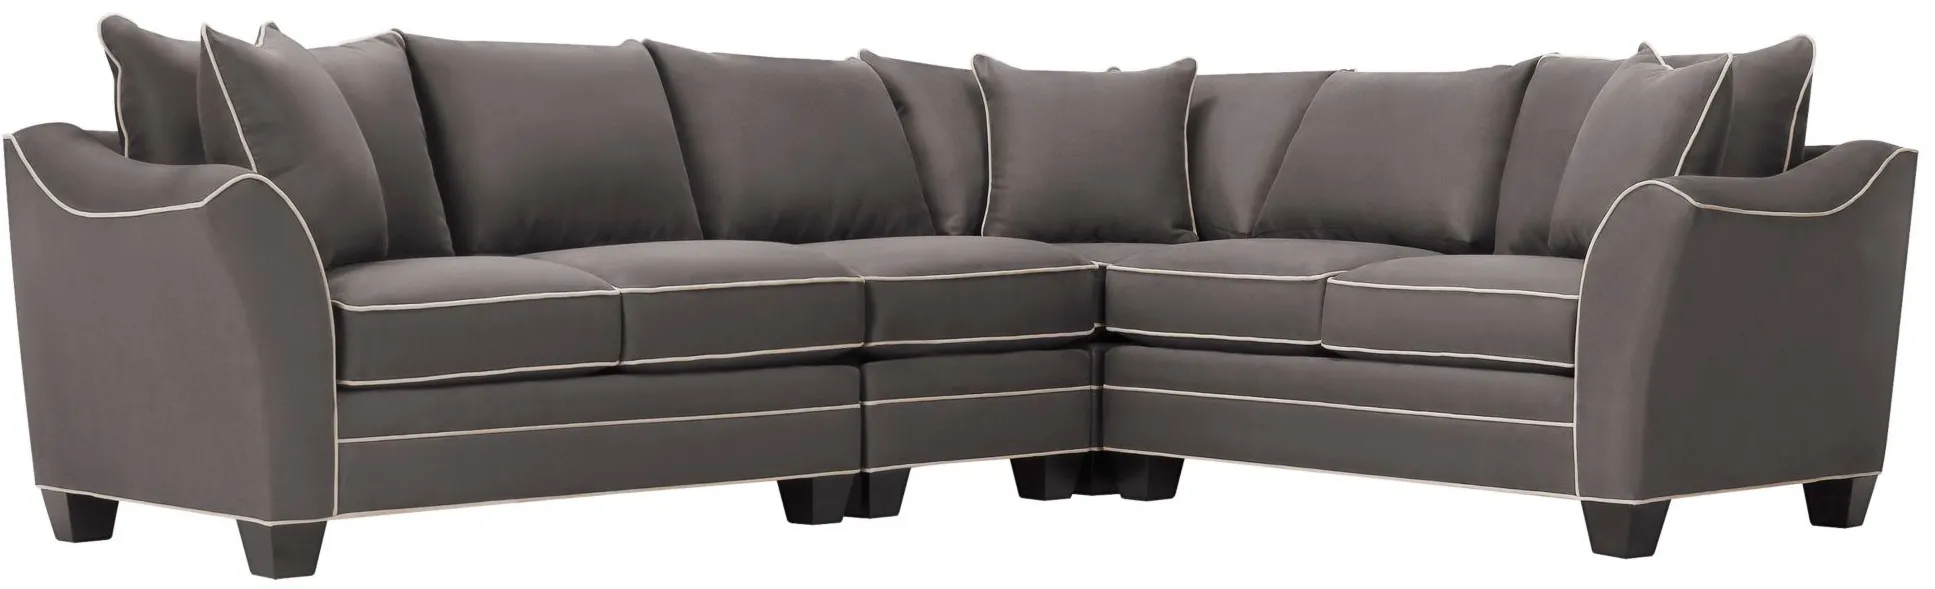 Foresthill 4-pc. Loveseat Sectional Sofa in Suede So Soft Slate by H.M. Richards